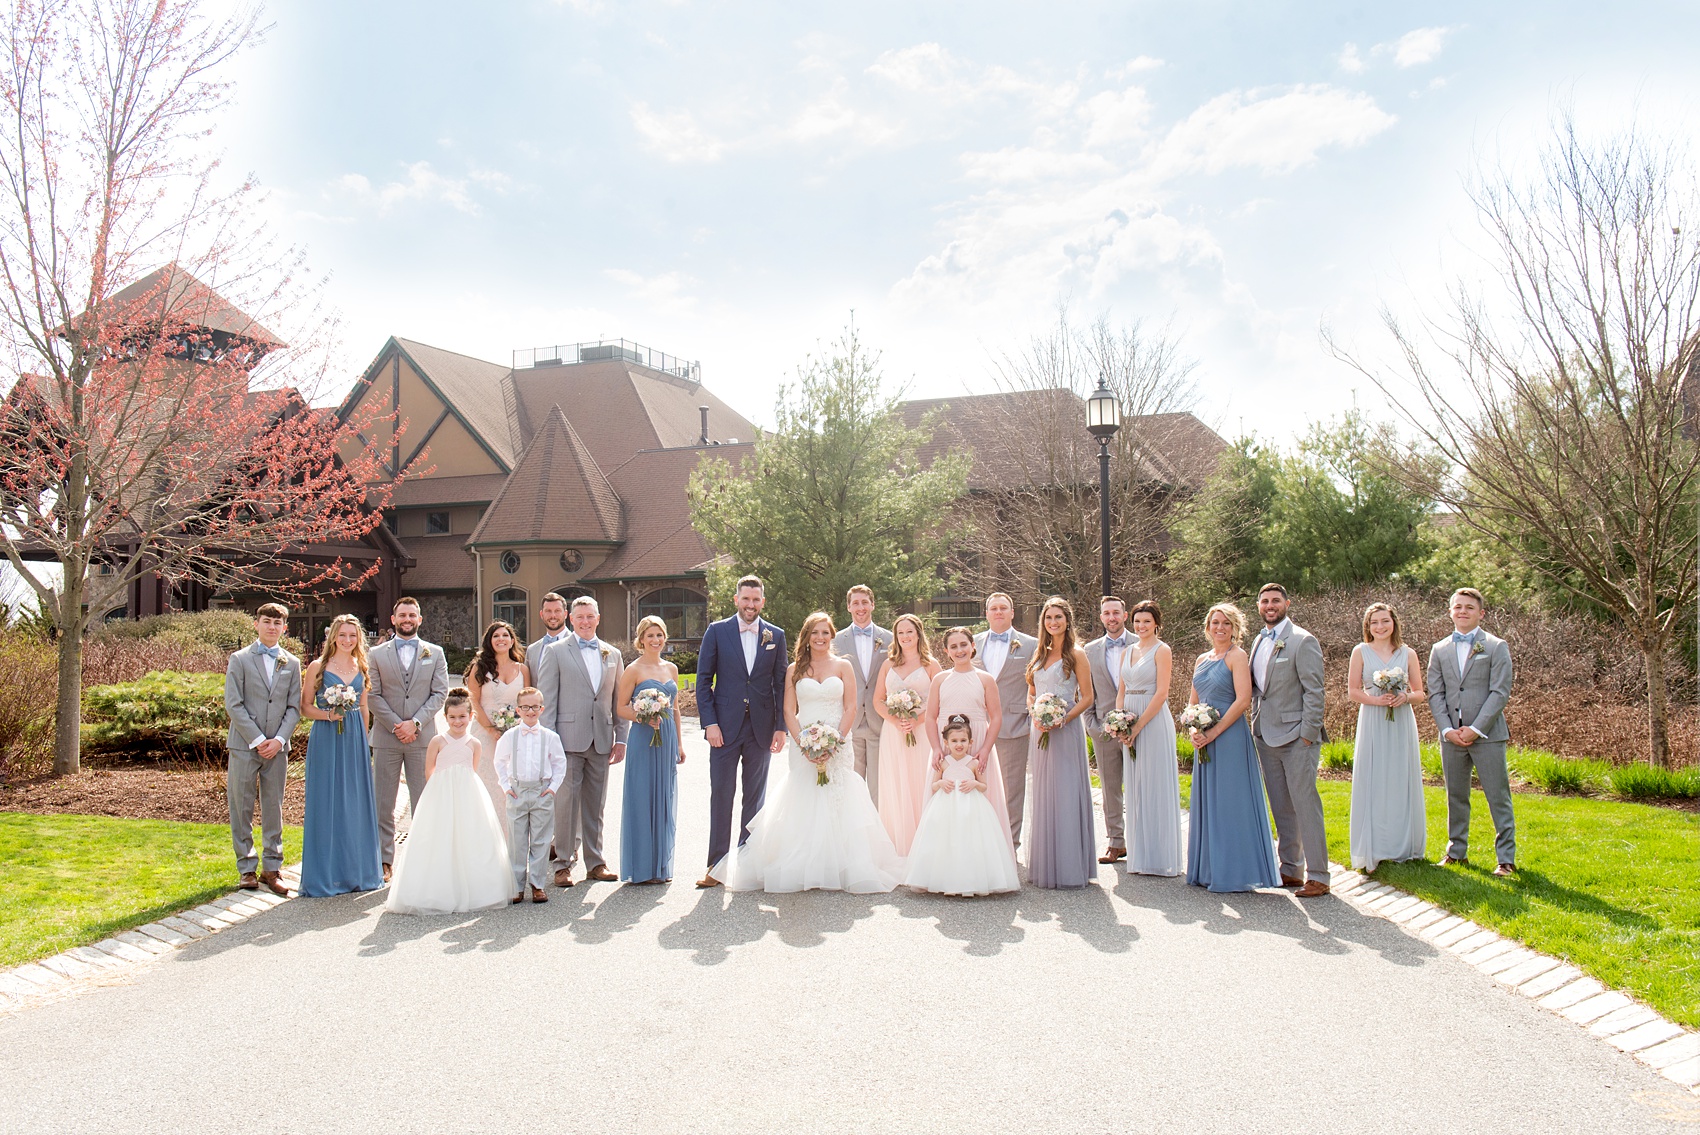 Crystal Springs Resort wedding photos in New Jersey, with photographer Mikkel Paige Photography. The couple’s spring wedding had an outdoor ceremony with photos at this rustic, woodsy venue showing their blue and pink palette decor from getting ready to their reception. This picture shows the complete wedding party: the groomsmen in their grey suits and bridal party (bridesmaids) in their mismatched blue and pink gowns. Click through to see their complete wedding recap! #NewJerseywedding #MikkelPaige #NJweddingphotographer #NJphotographer #brideandgroom #springwedding #mismatchedgowns #pinkandblue #weddingparty #bridalparty